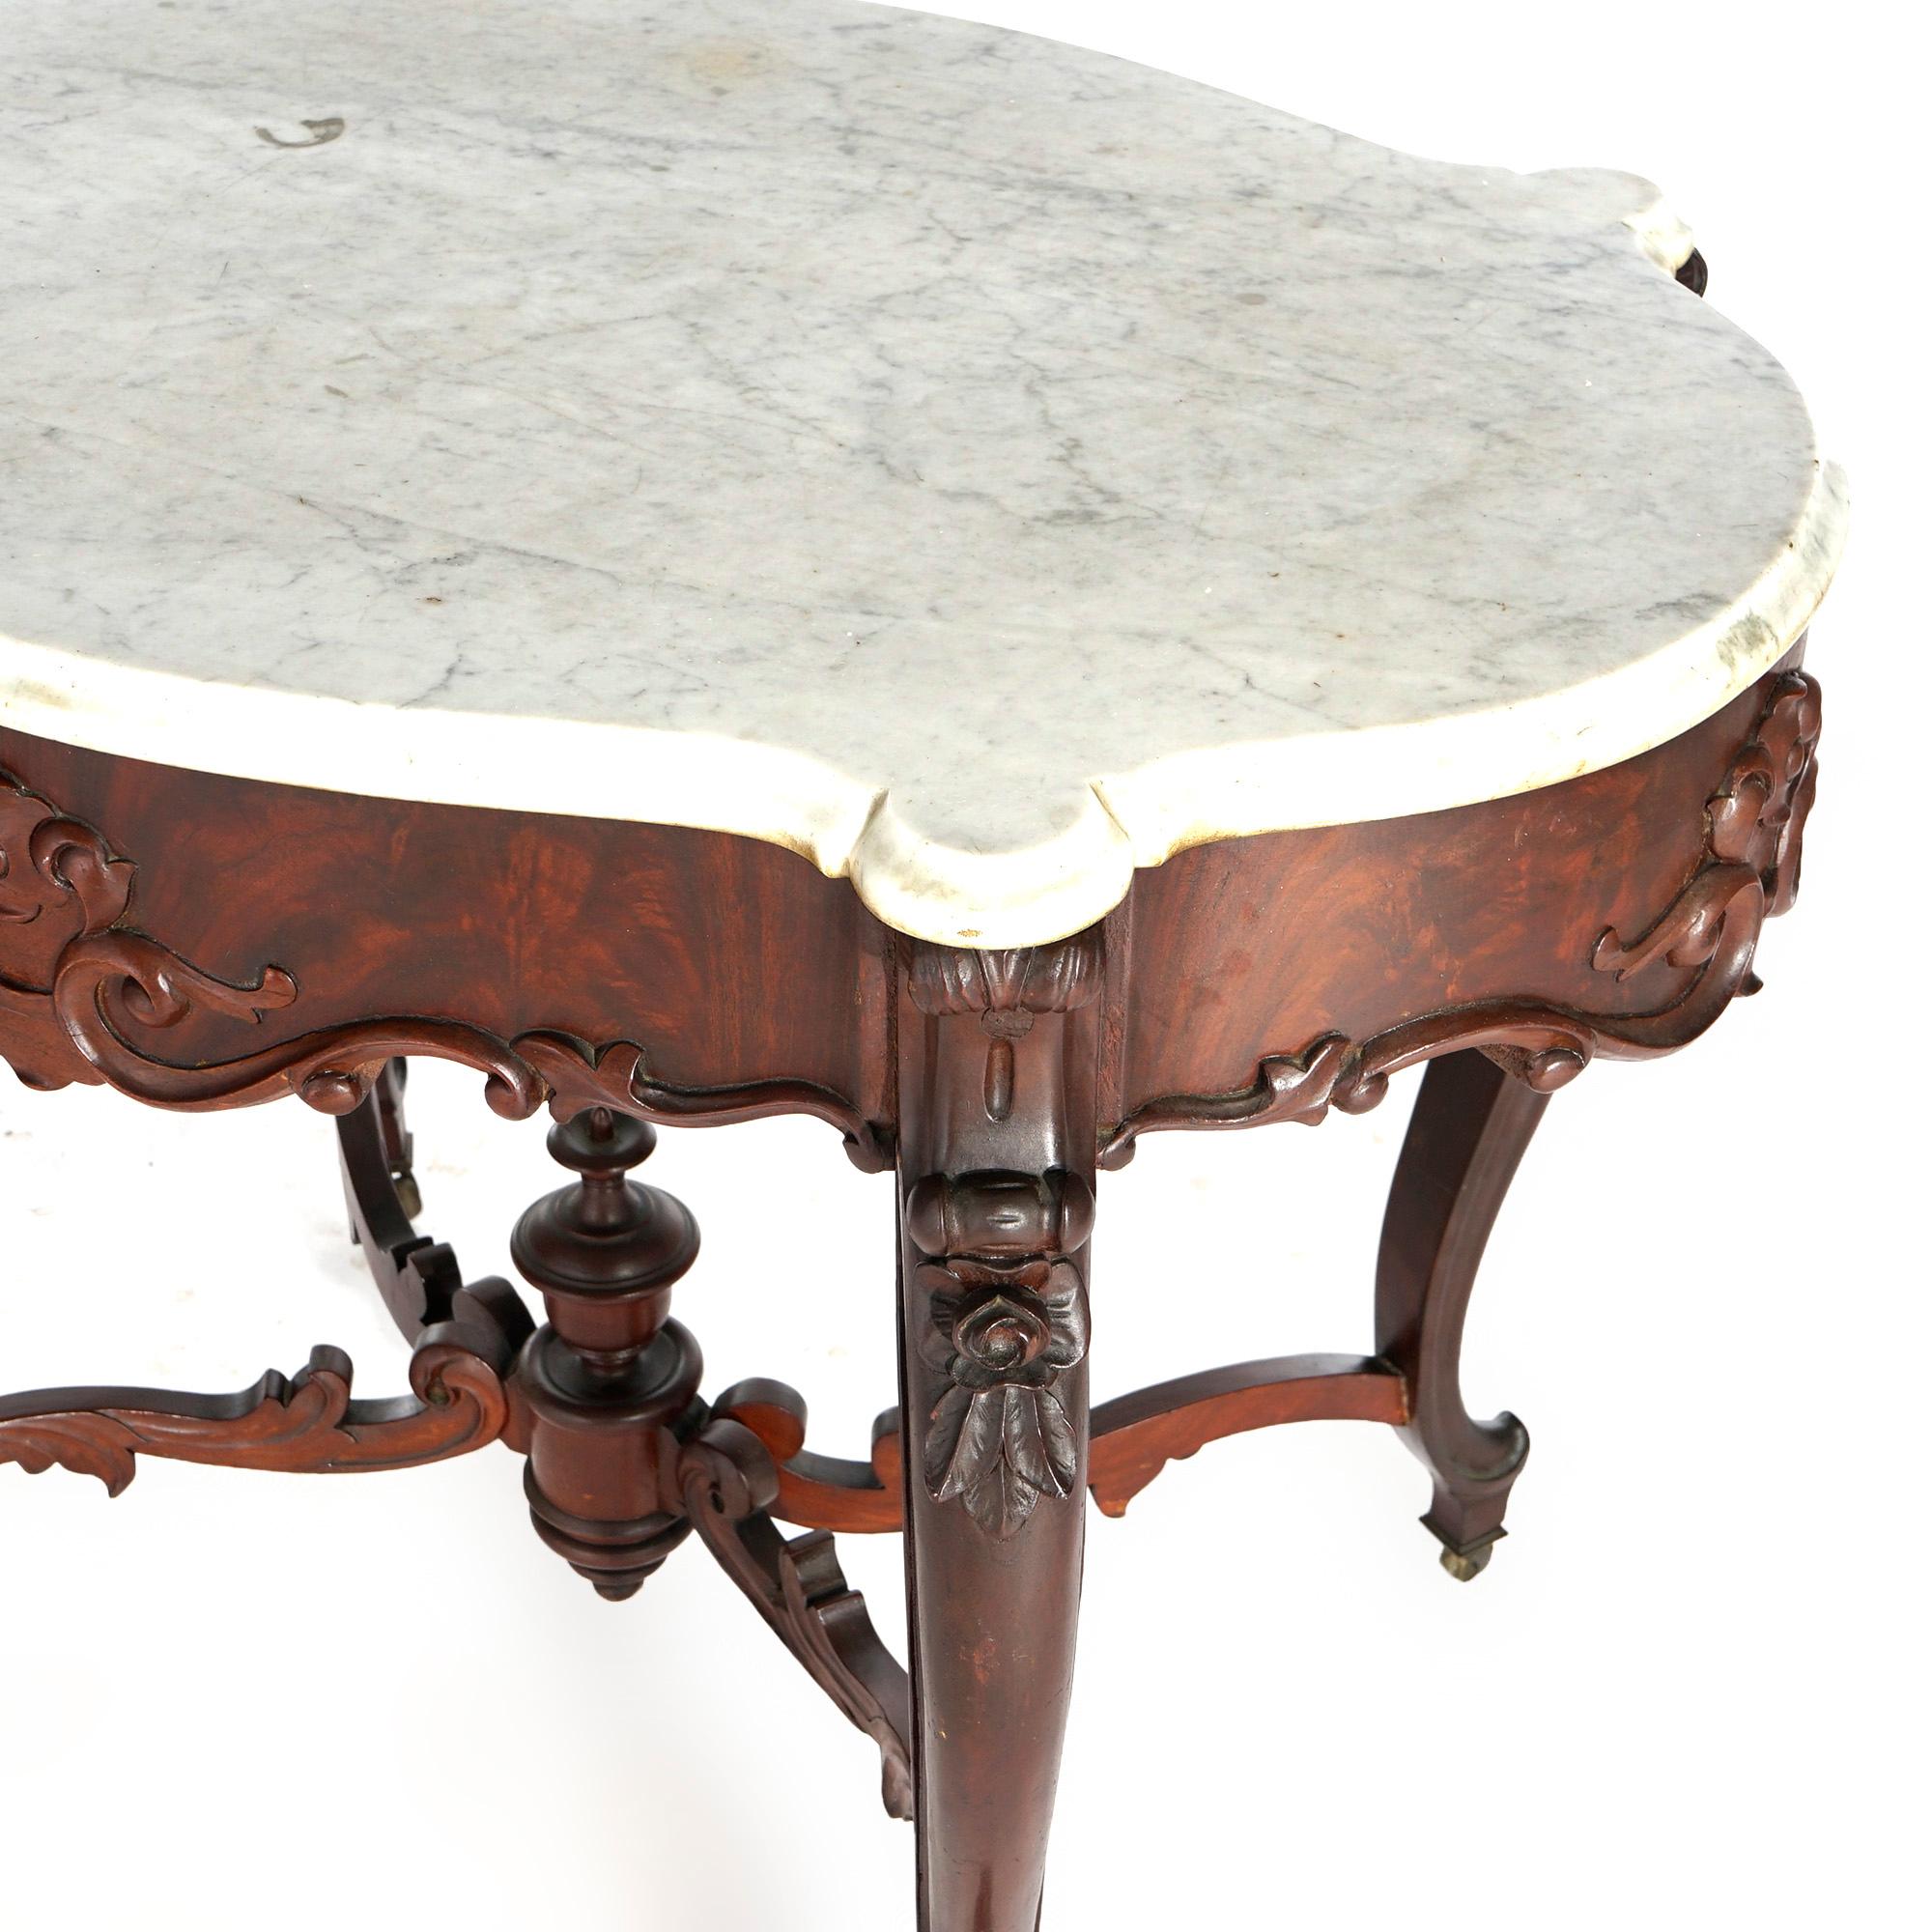 Antique Rococo Flame Mahogany & Marble Turtle Top Parlor Table Circa 1880 For Sale 3